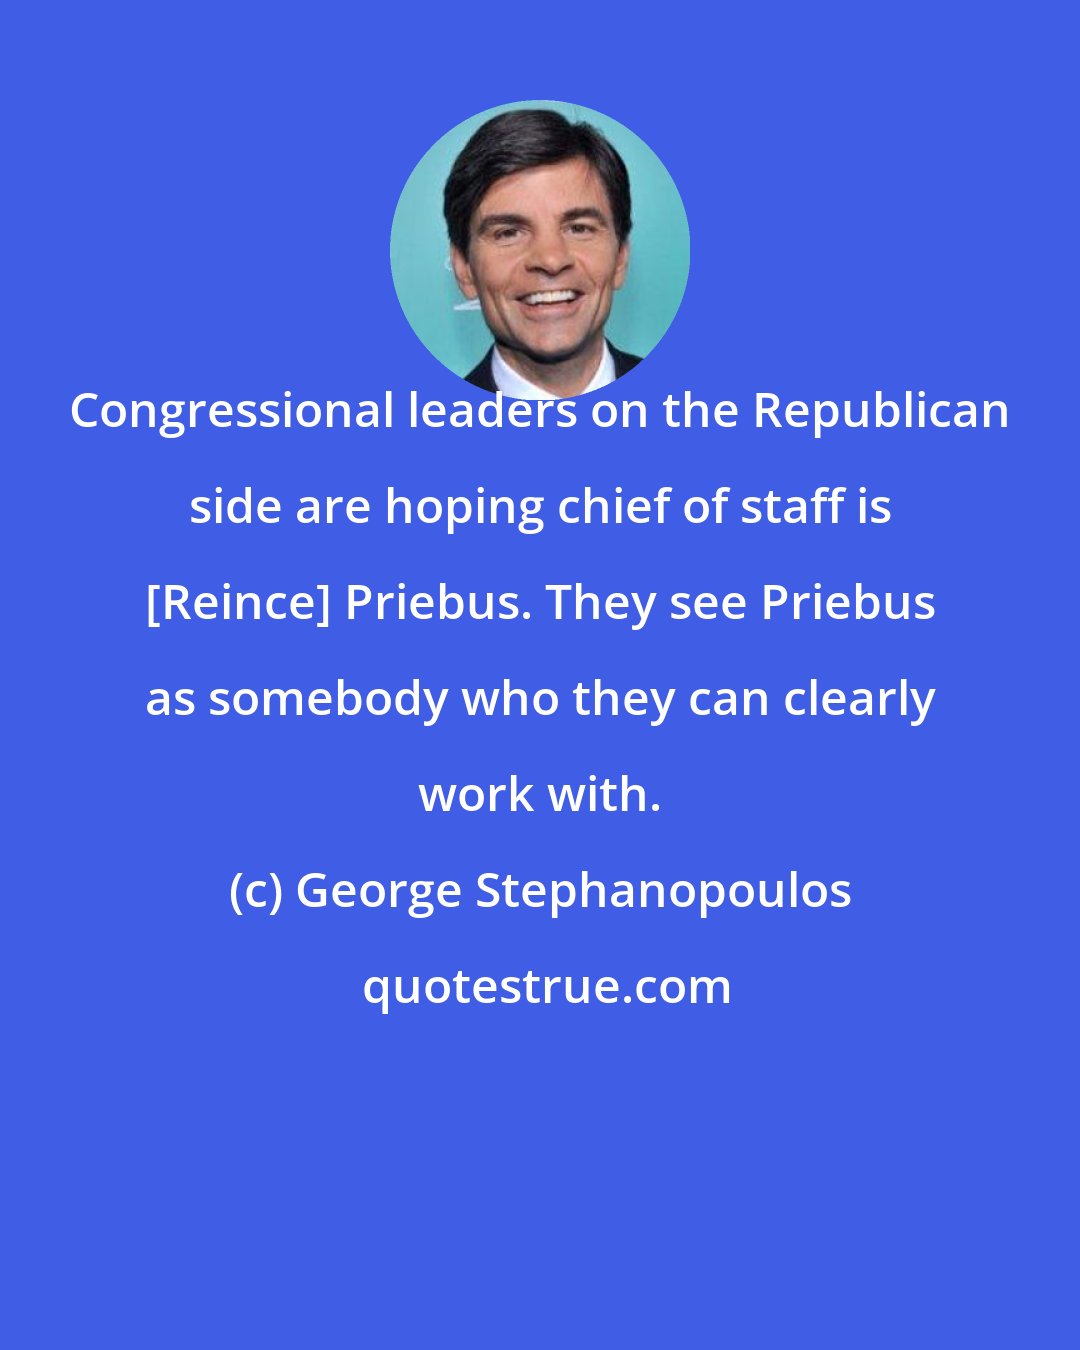 George Stephanopoulos: Congressional leaders on the Republican side are hoping chief of staff is [Reince] Priebus. They see Priebus as somebody who they can clearly work with.